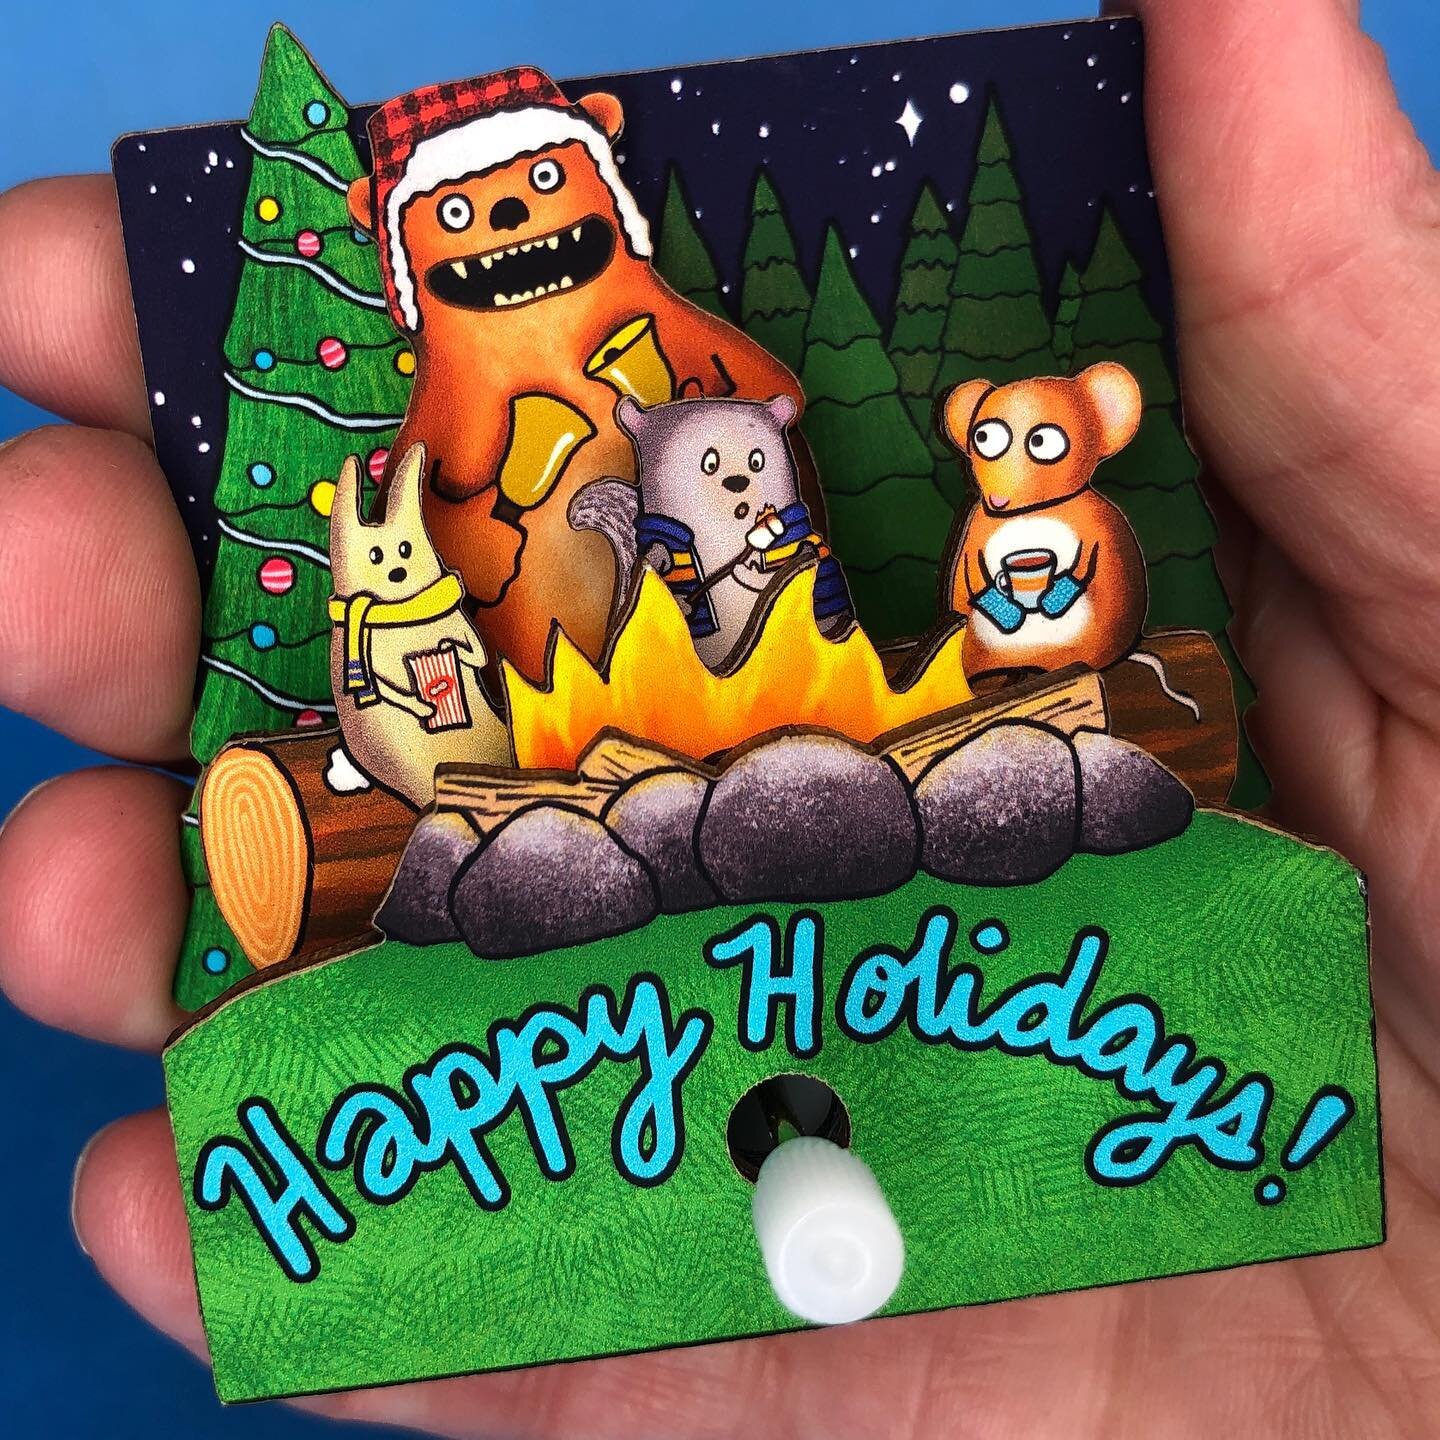 🙀🎄Wound up about the Holidays? Make your loved ones, liked ones, and the rest happy as a Bear with bells with our whizzy new Windup Happy Holidays Diorama! Available online or visit us today at Urban Craft Uprising! 🐻🐰🐿🐭
#bearbells #barbells #w